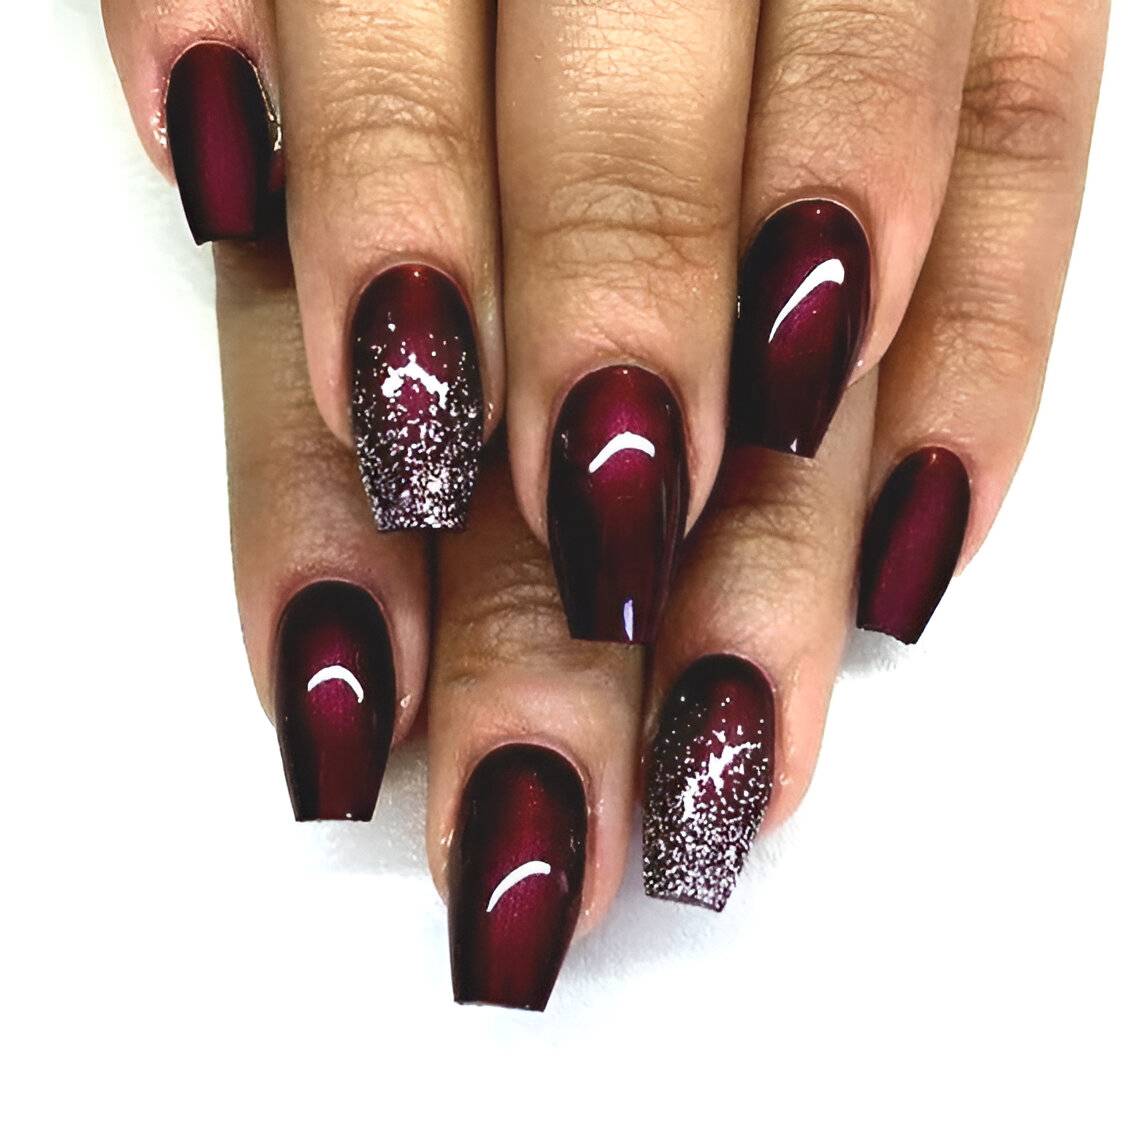 Burgundy Nails With Glittered Tips